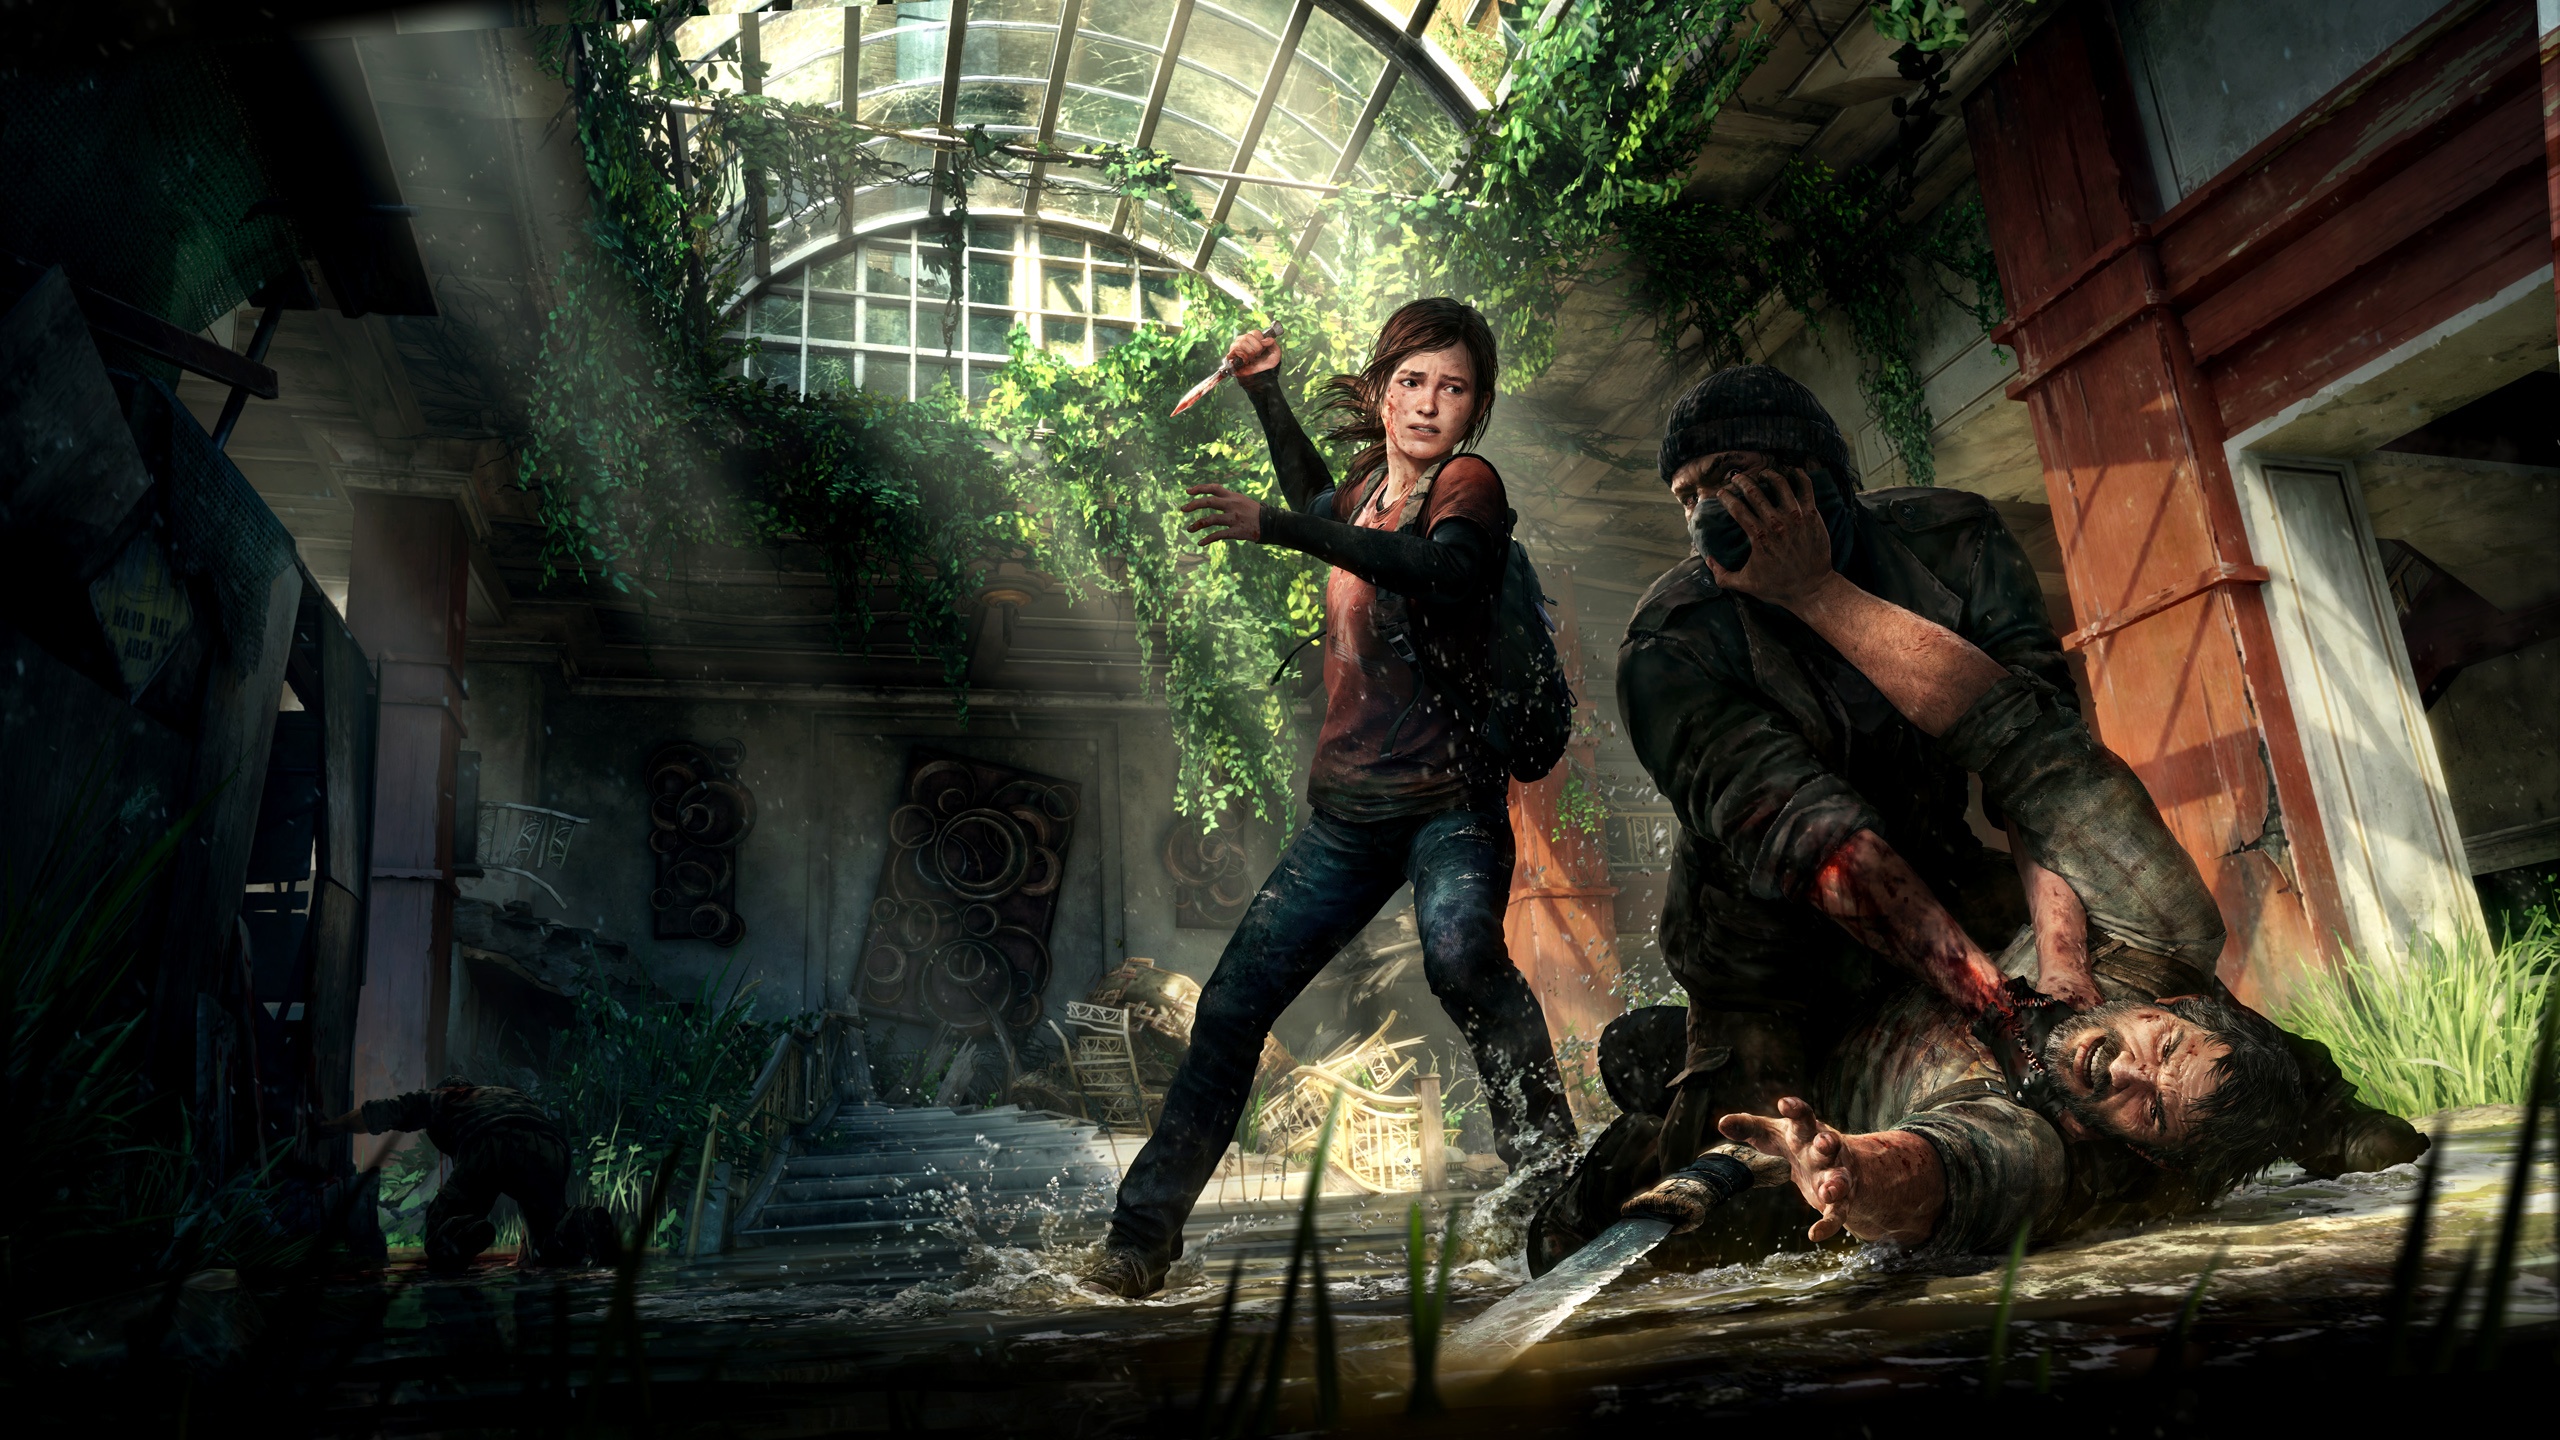 The Last Of Us Remastered Wallpaper by DanteArtWallpapers on DeviantArt